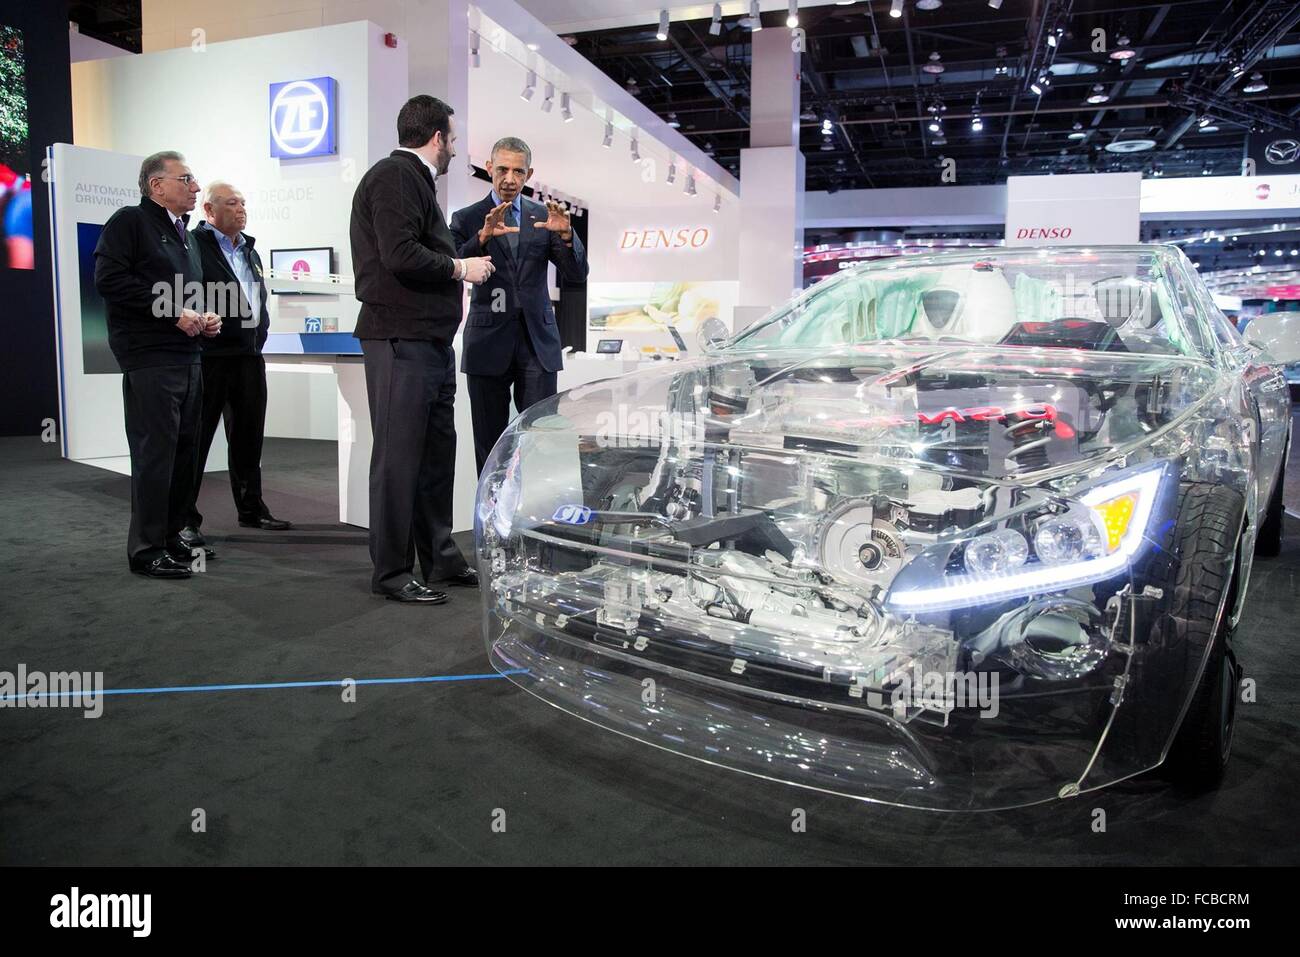 Detroit, Michigan, USA. 20th January, 2016. U.S President Barack Obama looks at the ZF glass car with Bryan Johnson, ZF Communication, during a visit to the 2016 North American International Auto Show at the Cobo Center January 20, 2016 in Detroit, Michigan. Stock Photo